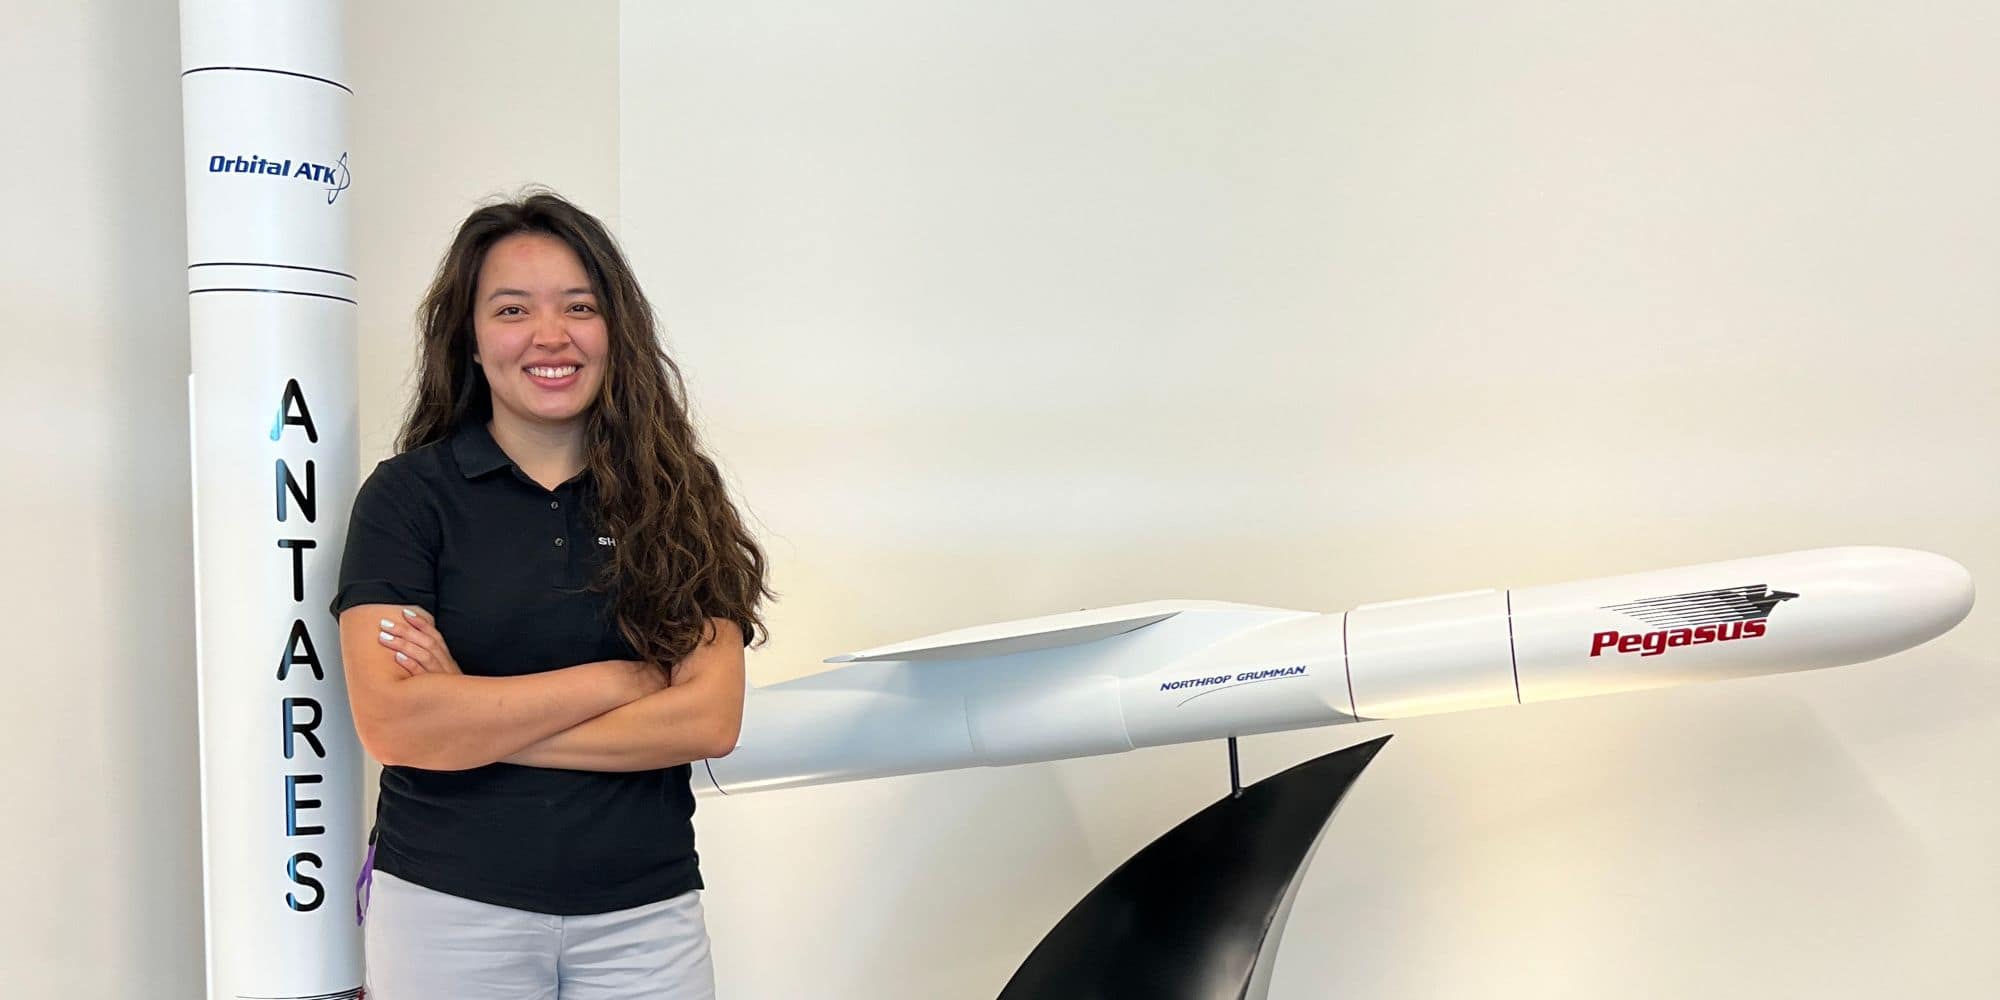 Electrical Engineering alumna Chloeleen Mena ('20) worked on the Mars Helicopter Project with NASA's Jet Propulsion Laboratory. (Photo: Chloeleen Mena)